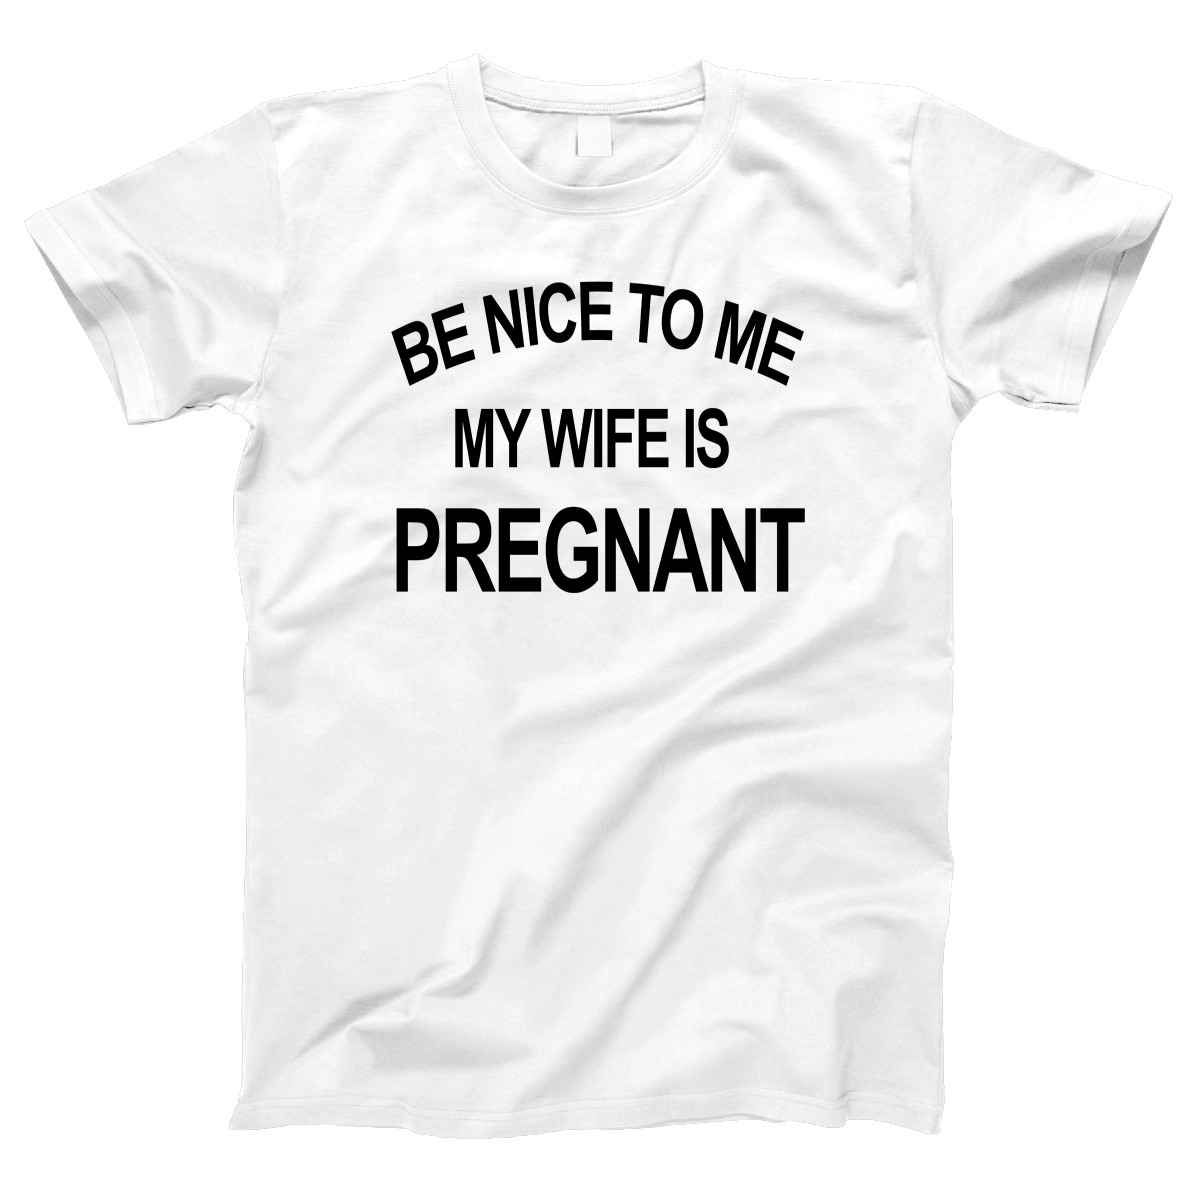 Be Nice To Me My Wife Is Pregnant Women's T-shirt | White